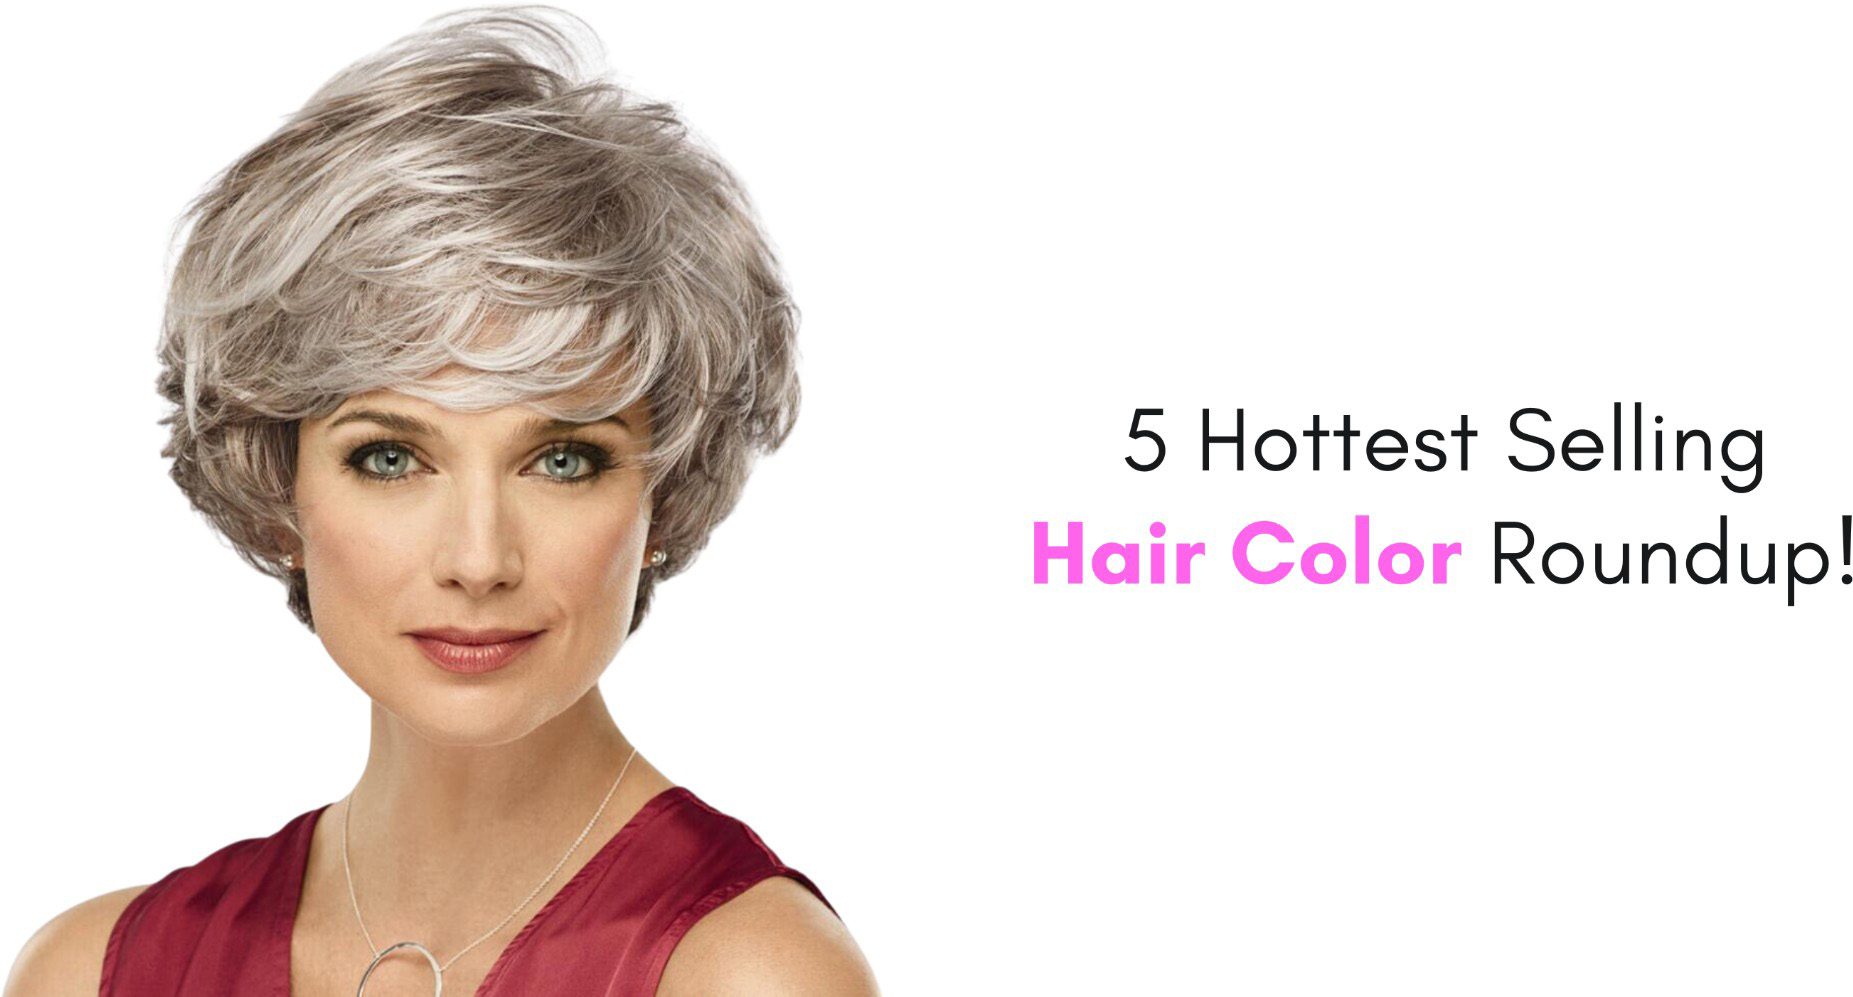 5 hottest selling hair color roundup